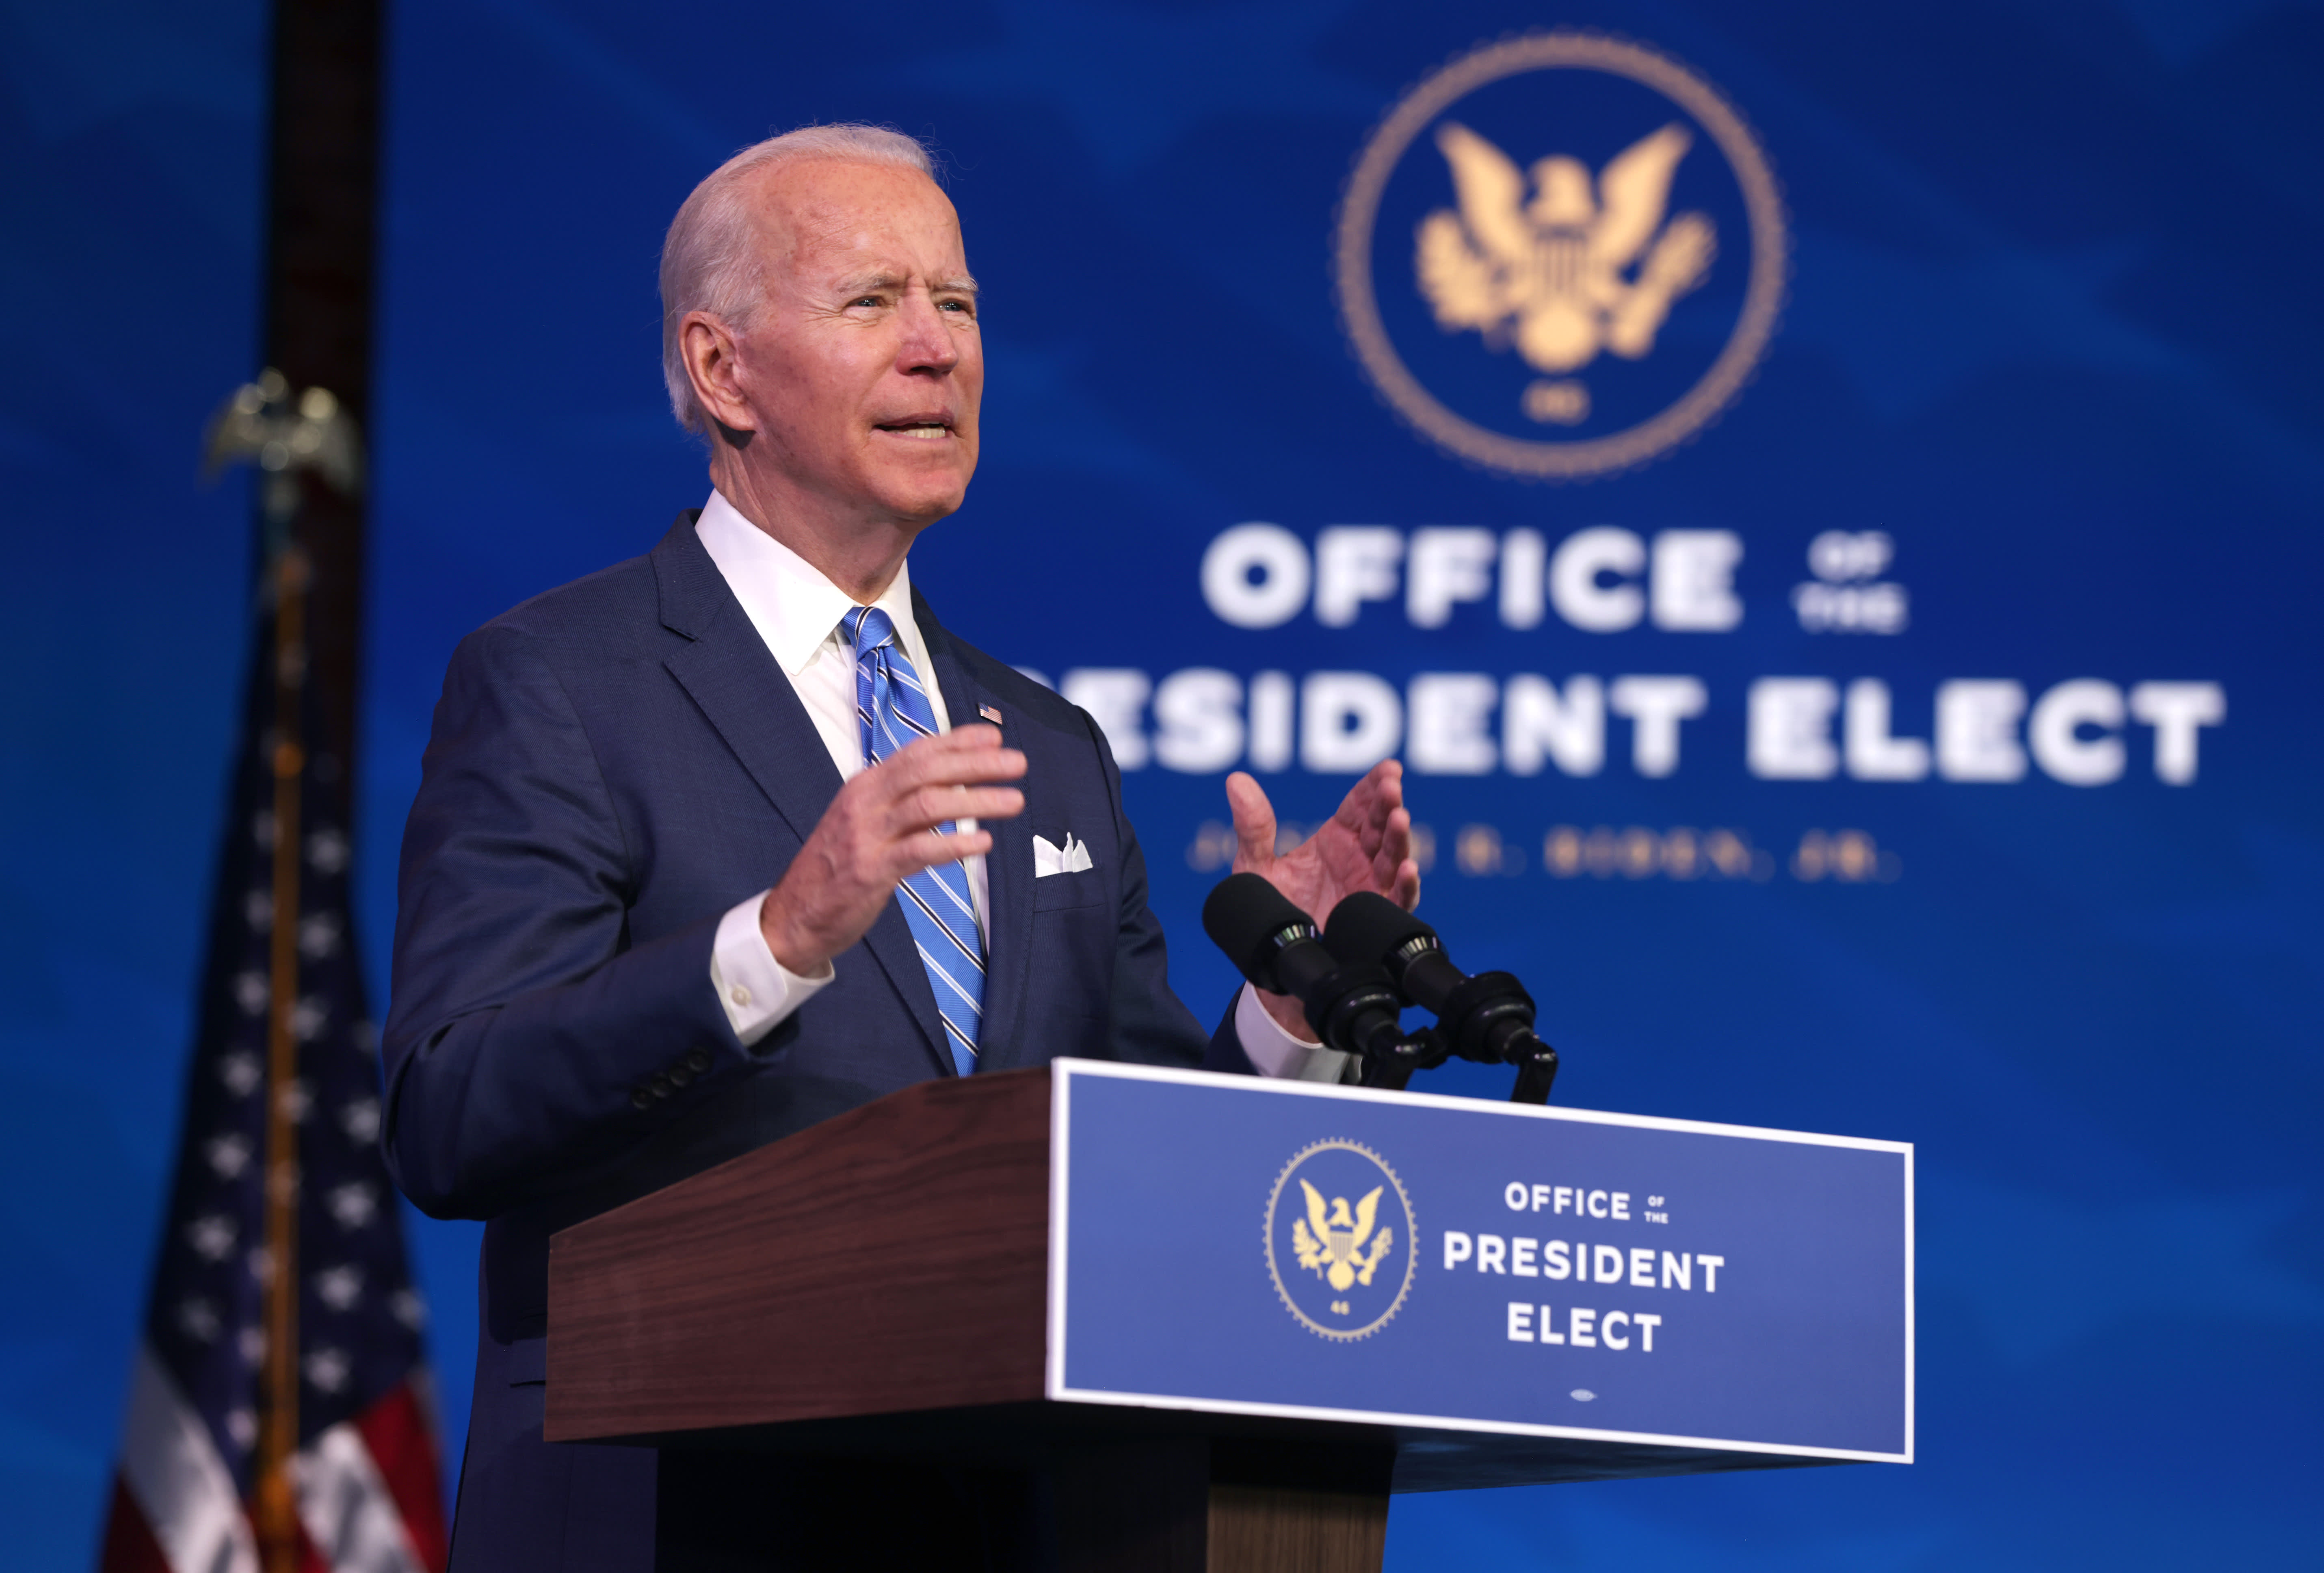 Biden’s stimulus plan could send funds from Asia and China to the US: JPMorgan